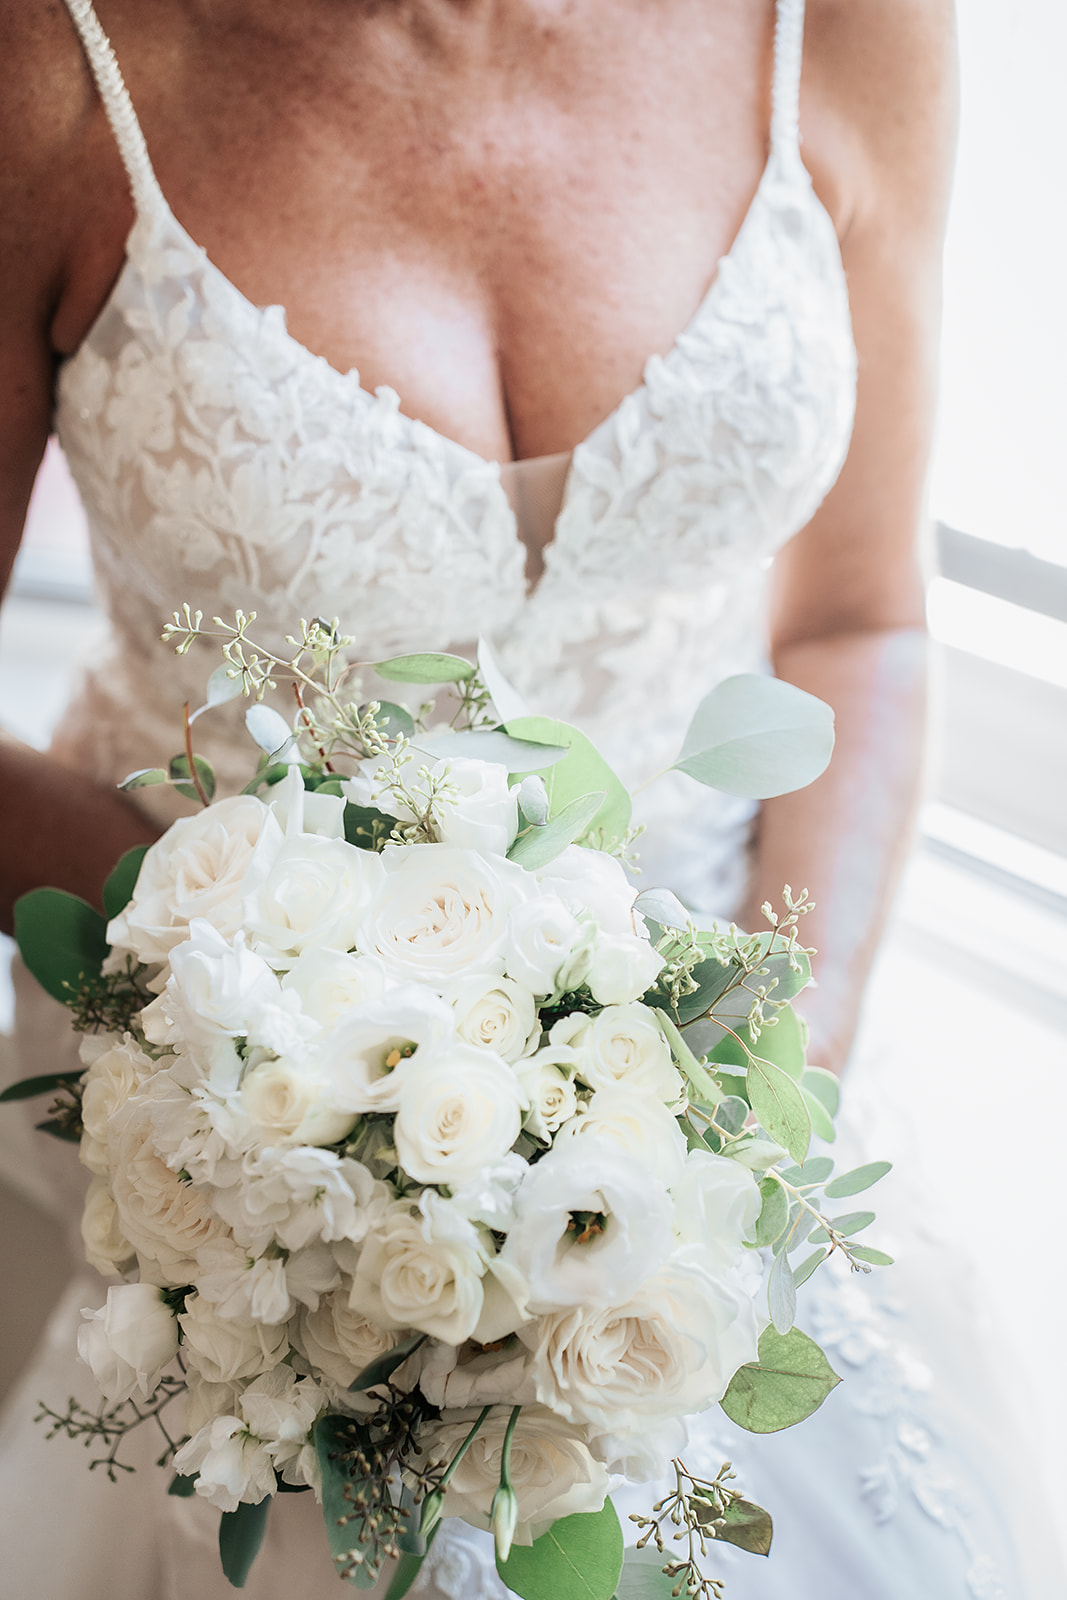 Artistic shot of bridal bouquet and dress